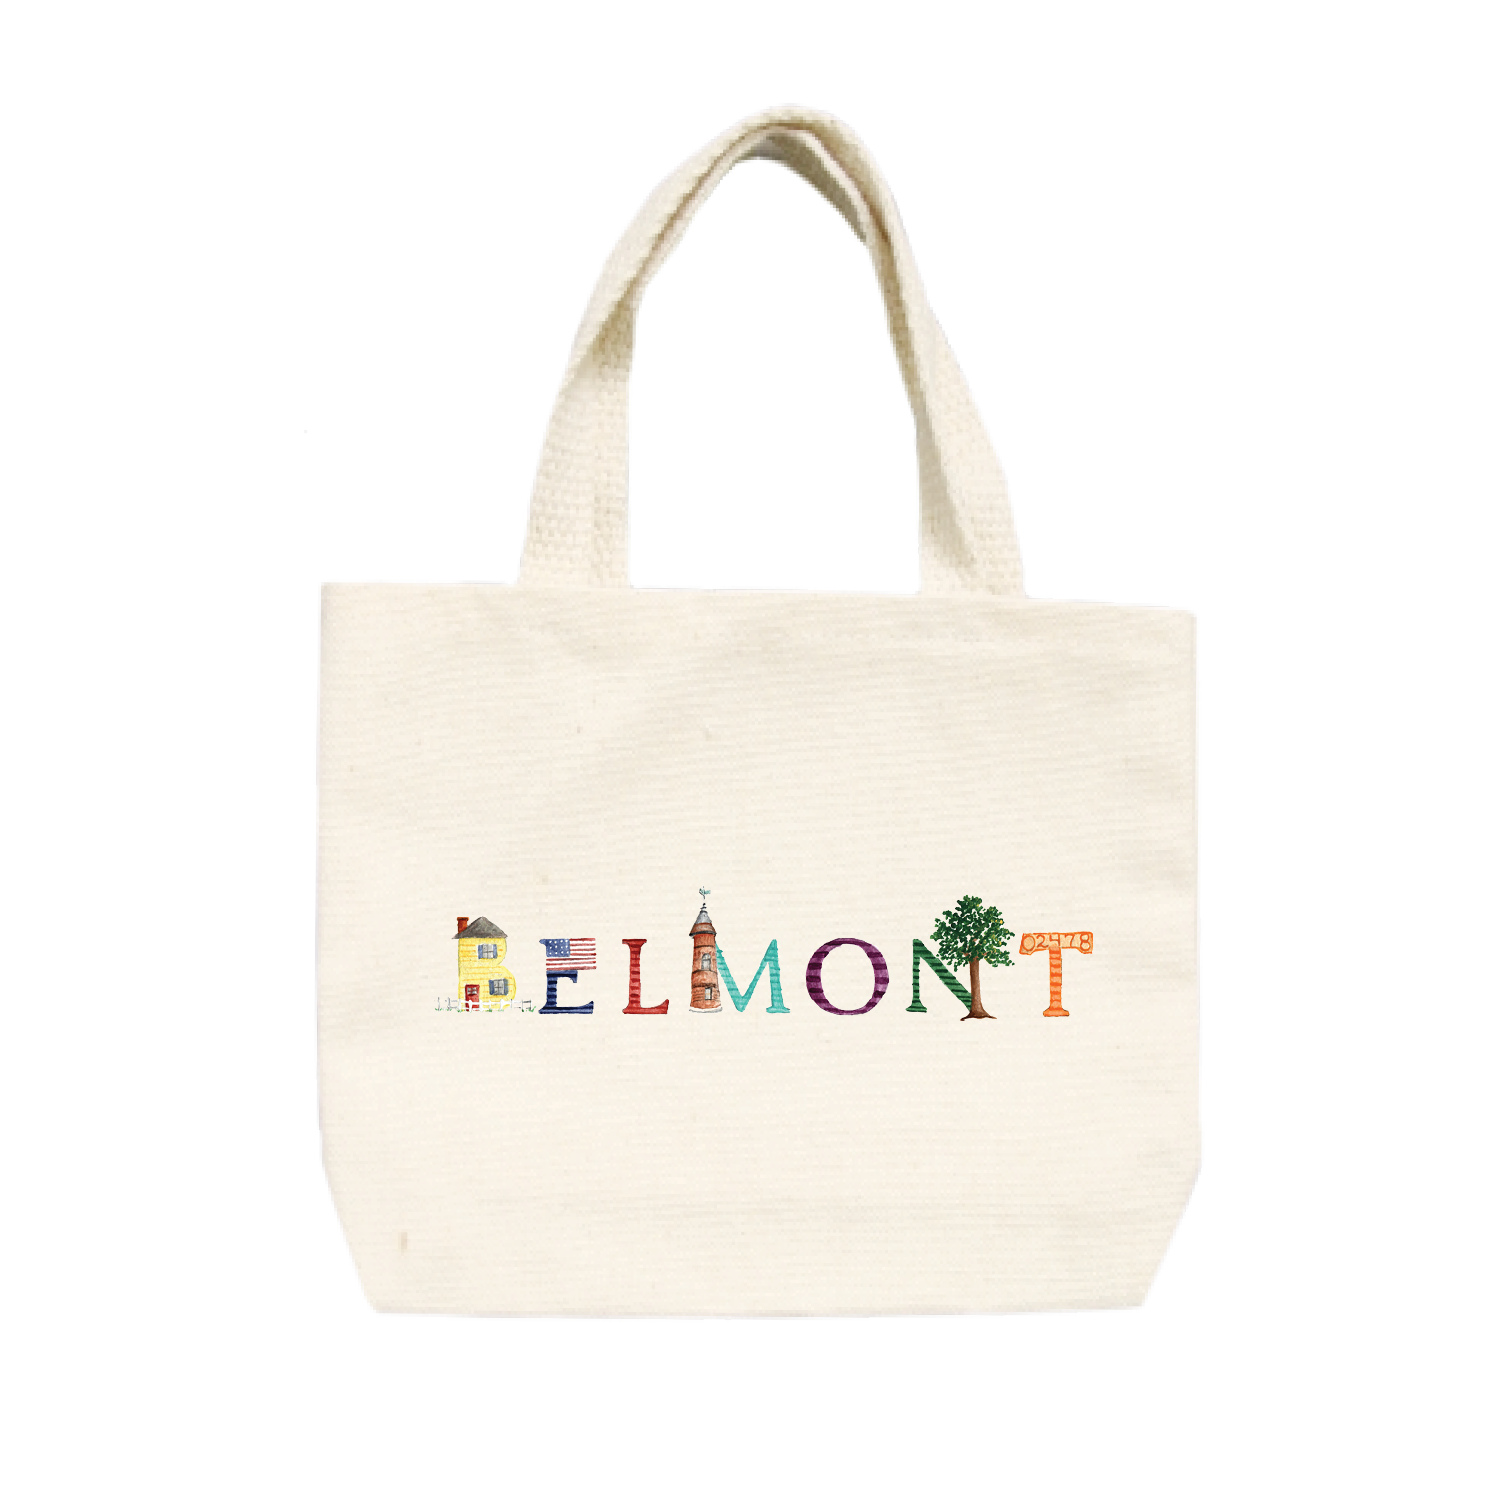 Belmont small tote